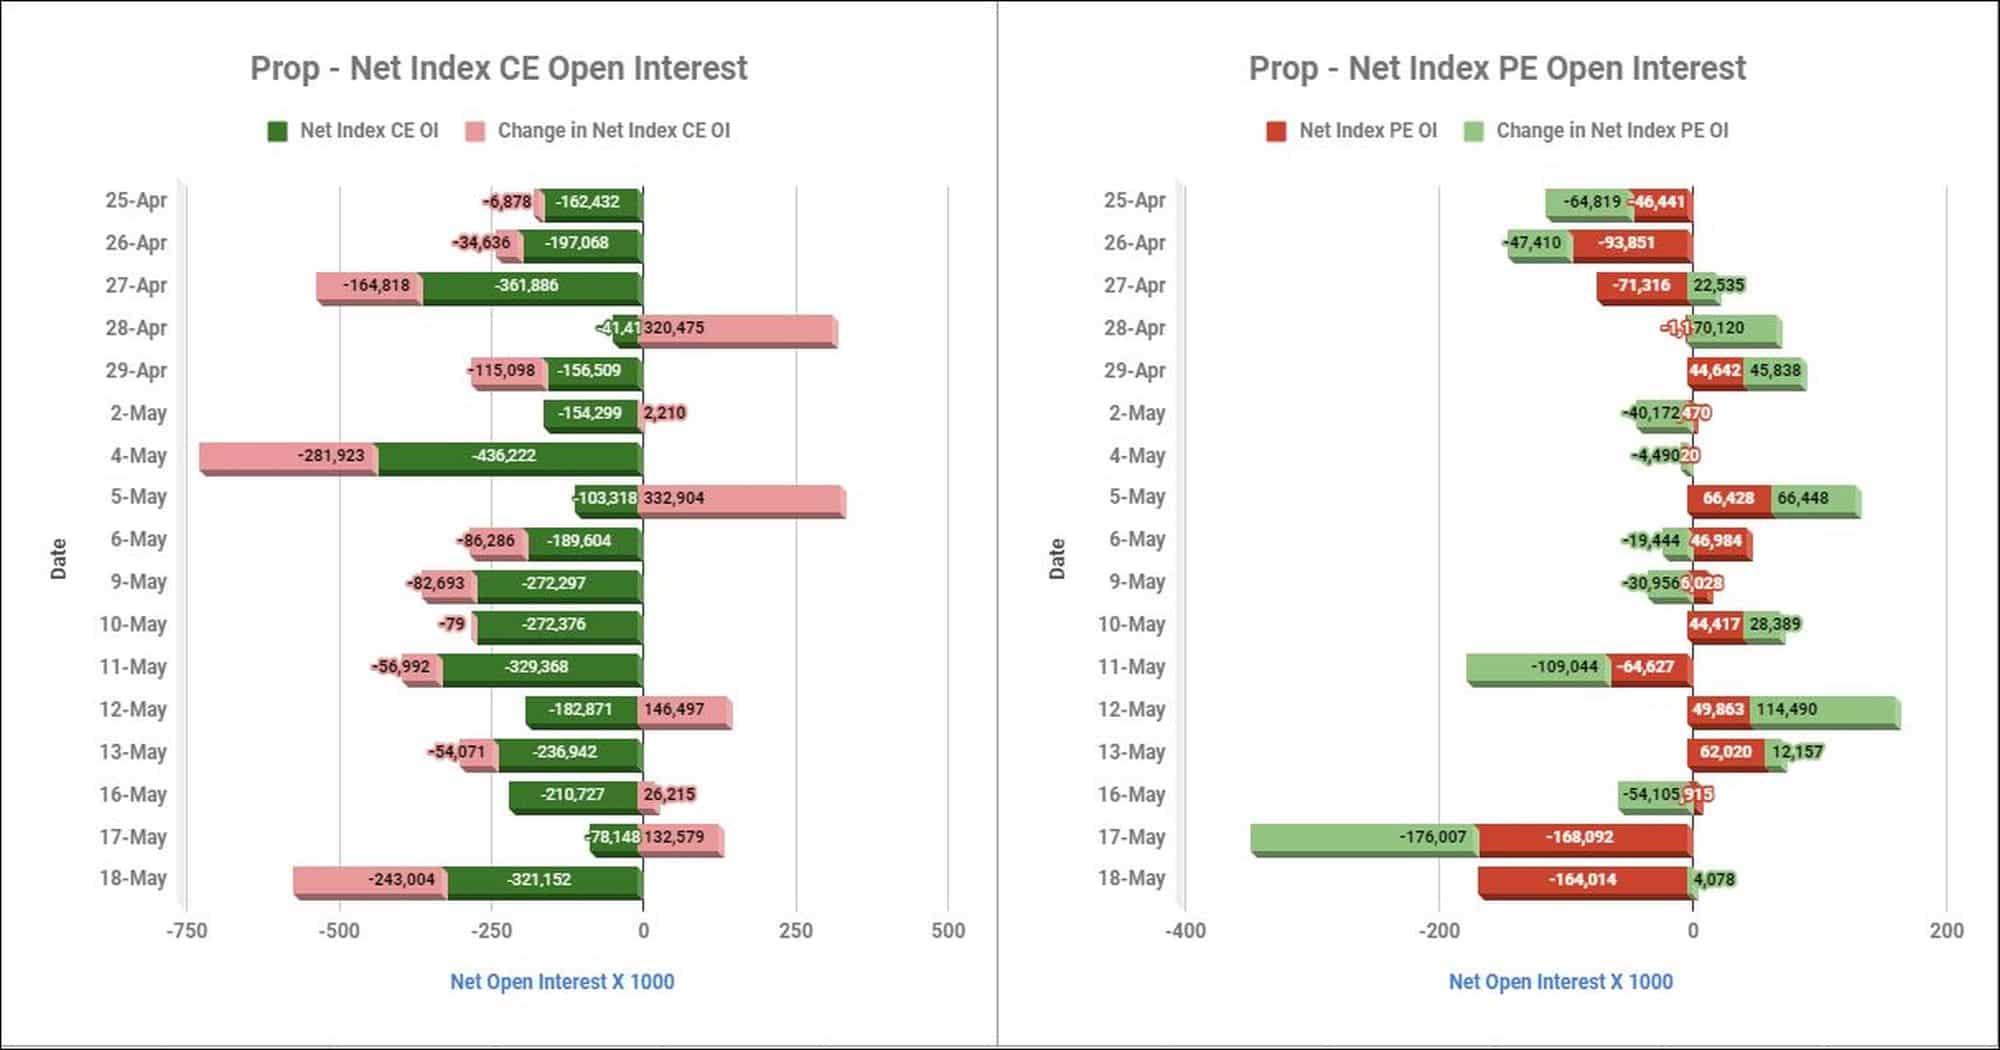 Proinop18May Participantwise Net Open Interest And Net Equity Investments – 18Th May 2022 Client, Equity, Fii, Index Futures, Index Options, Open Interest, Prop